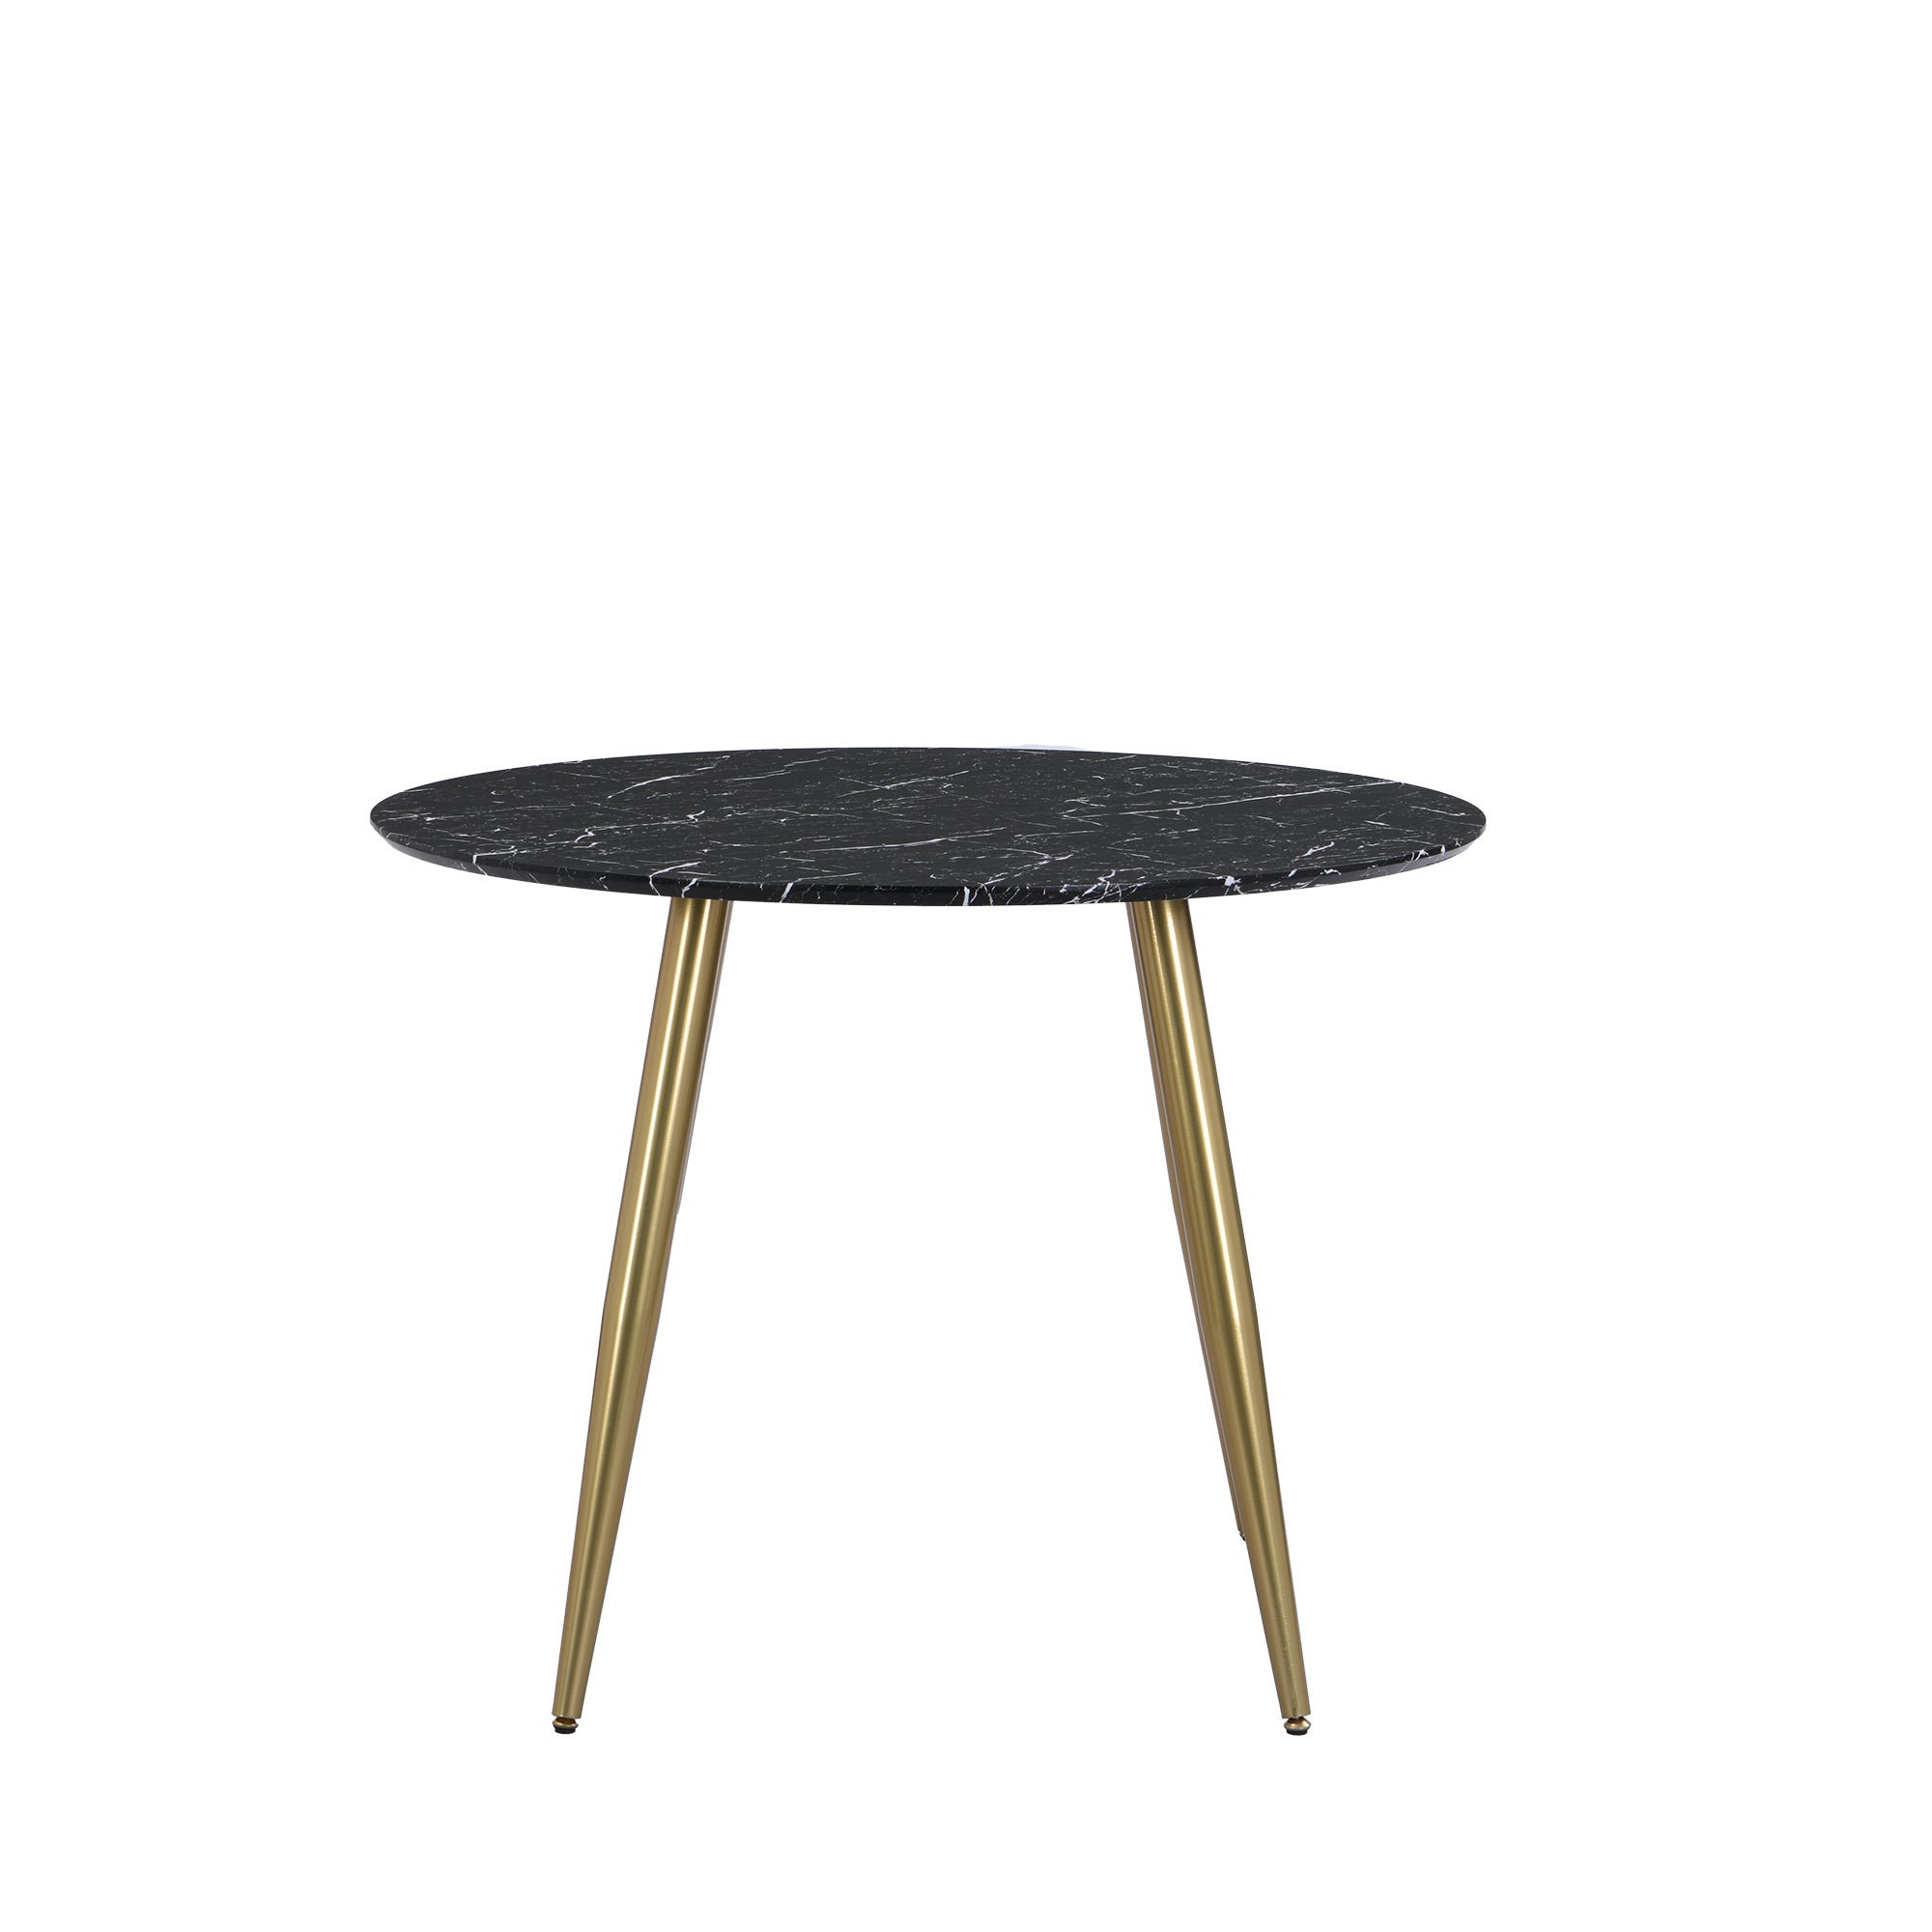 Kendall 4 Seater Round Dining Table Marble Effect Black